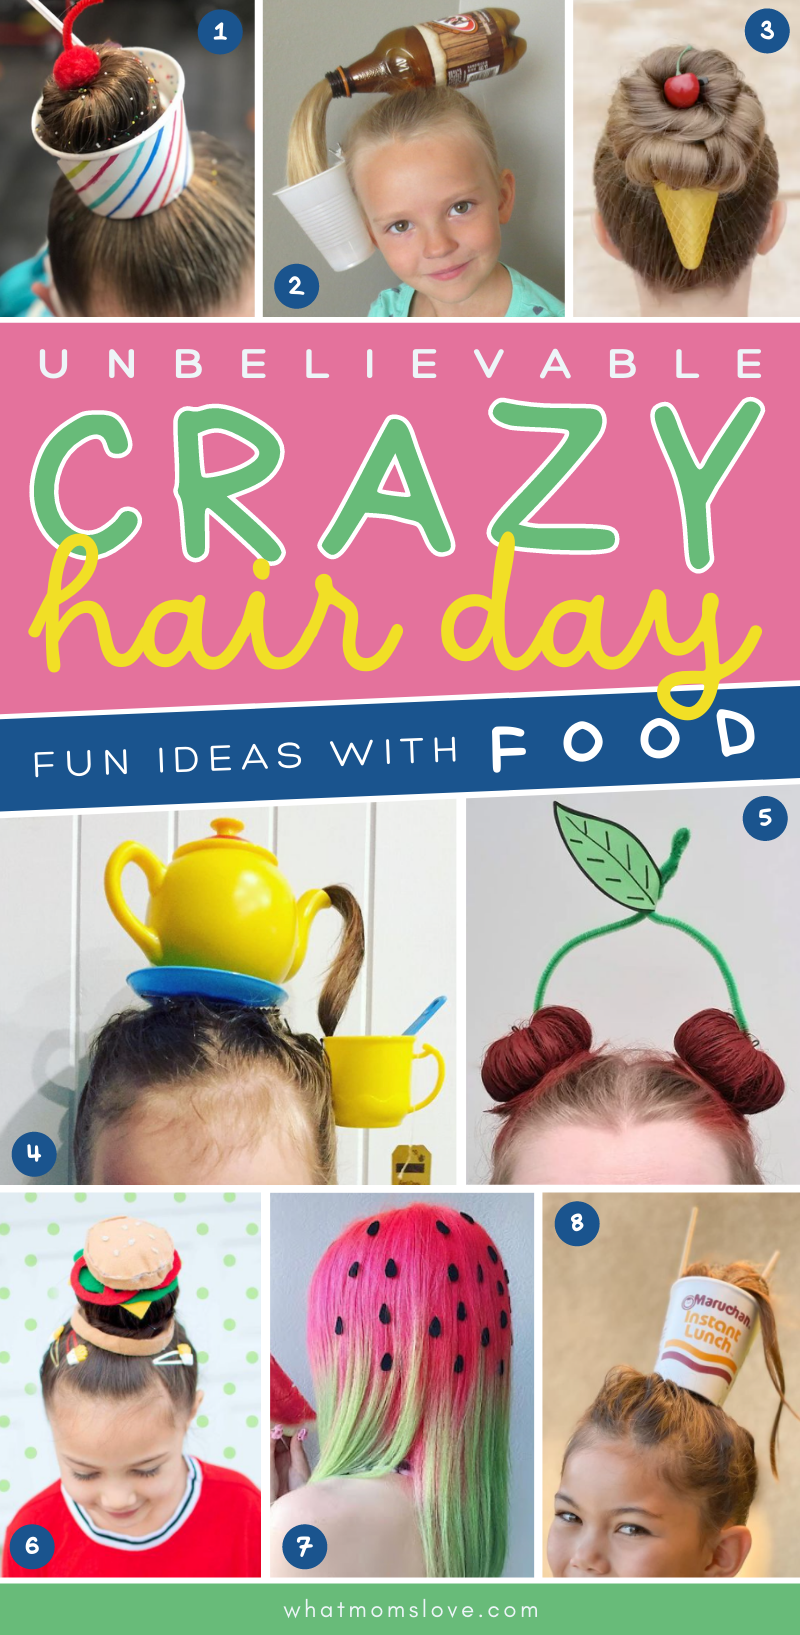 Top 48 image ideas for crazy hair day 